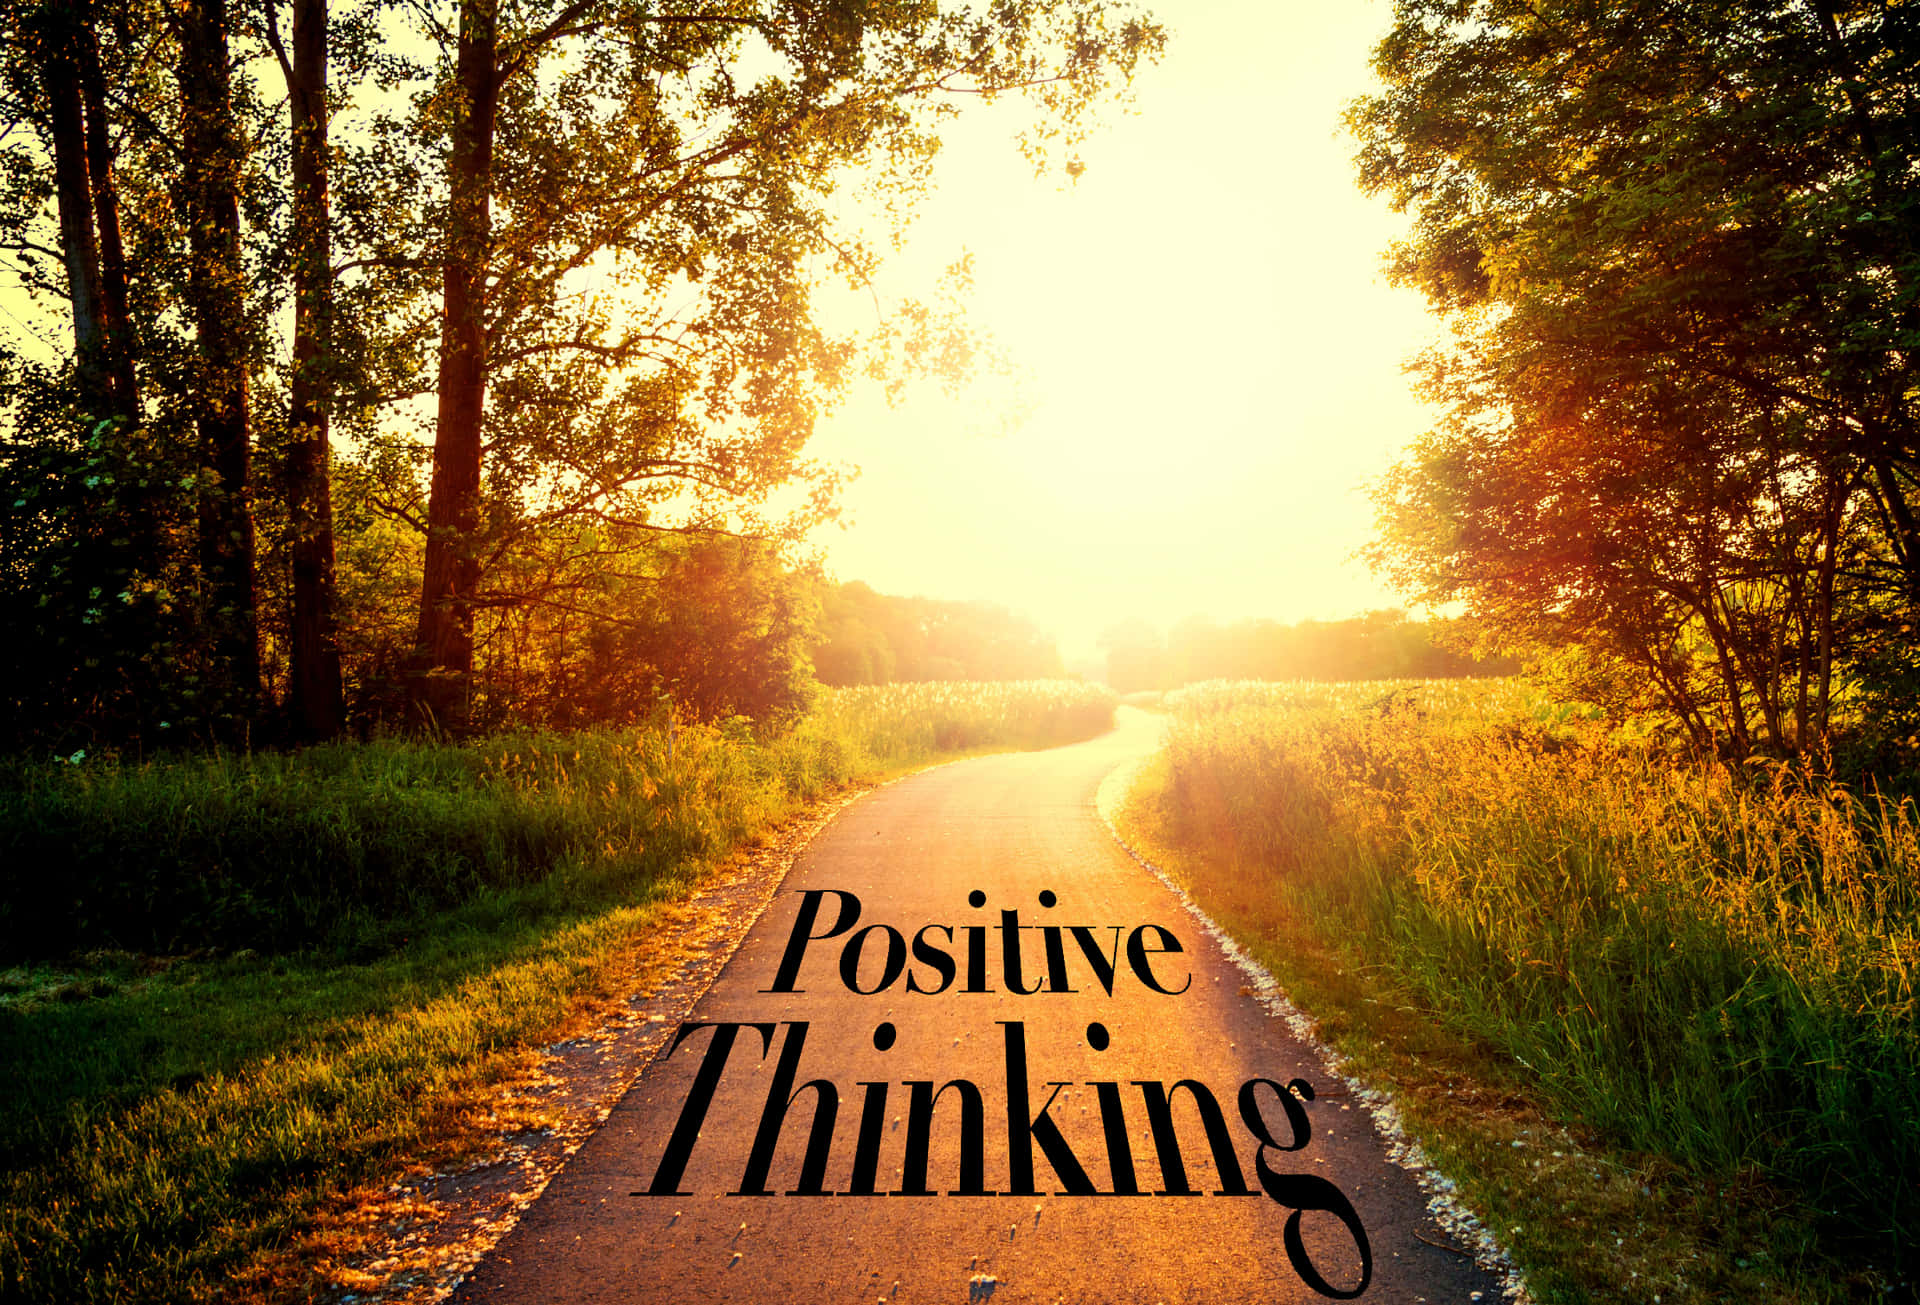 Positive Thinking - A Road With Trees And Sun